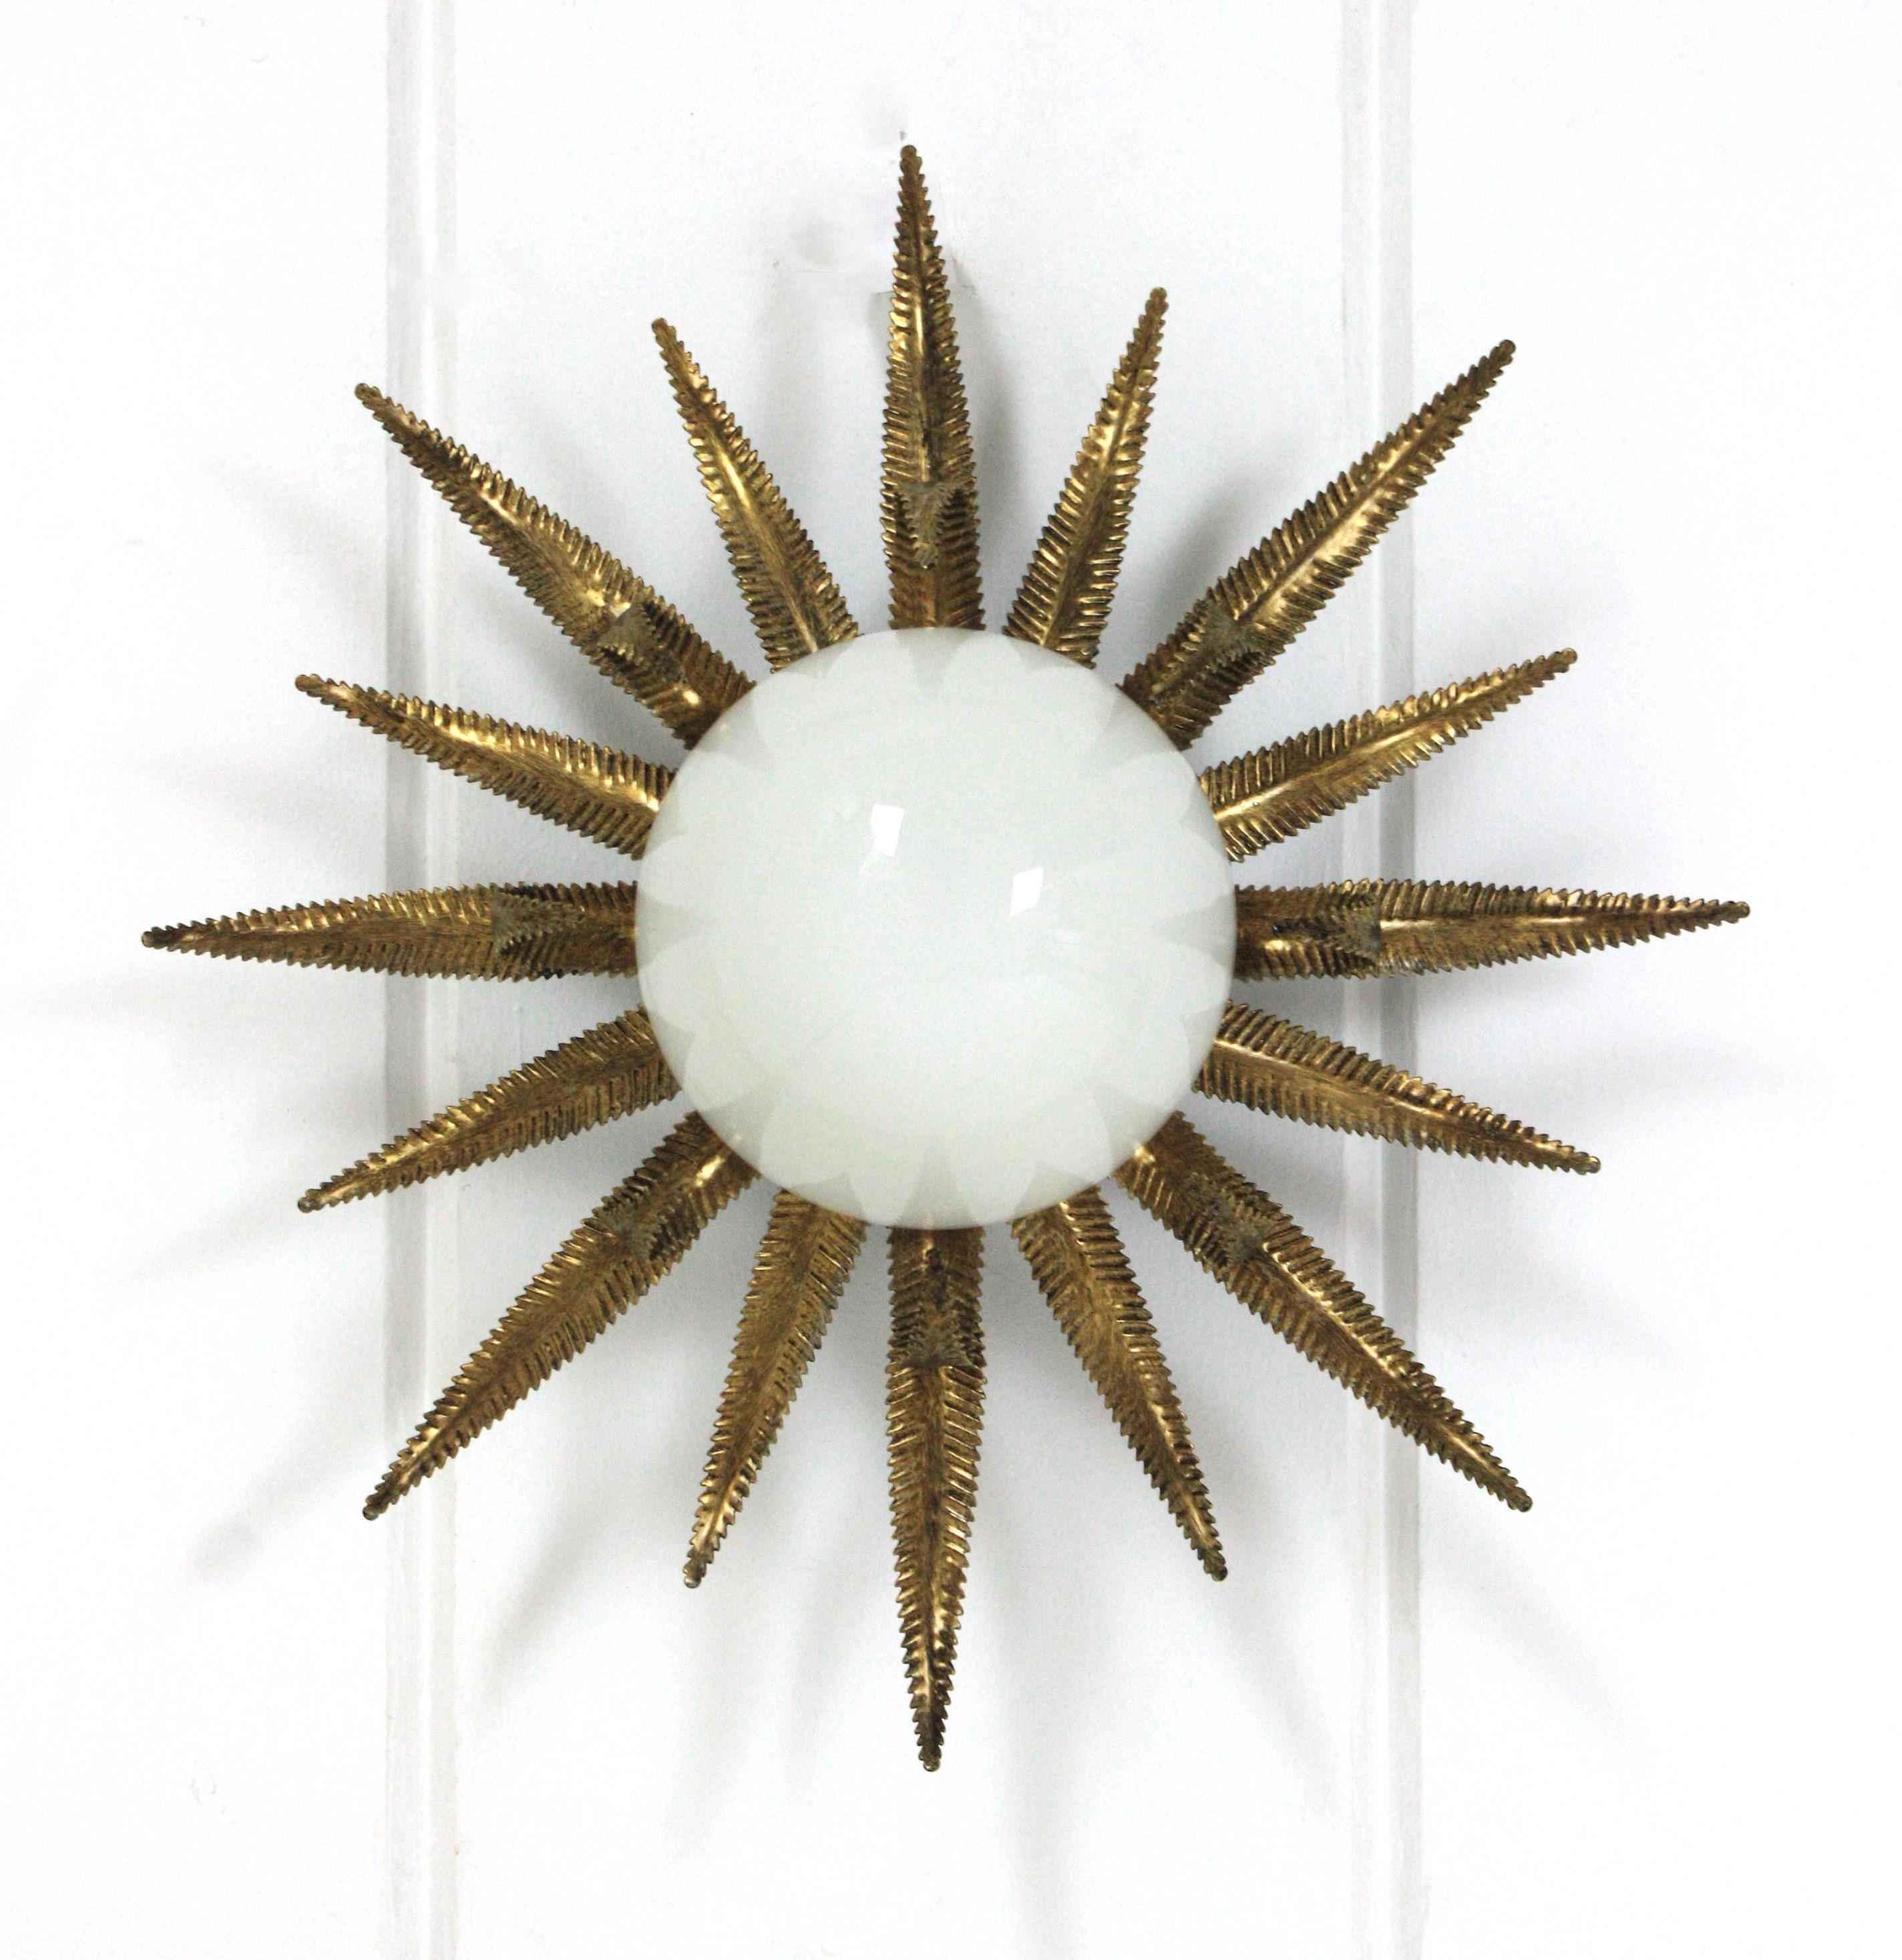 Outstanding French sunburst flush mount in gilt metal and milk glass, 1950s
This Sunburst starburst ceiling light fixture has an eye-catching construction. The sunburst backplace in patinated gilt iron and sunburst or starburst shape holds an